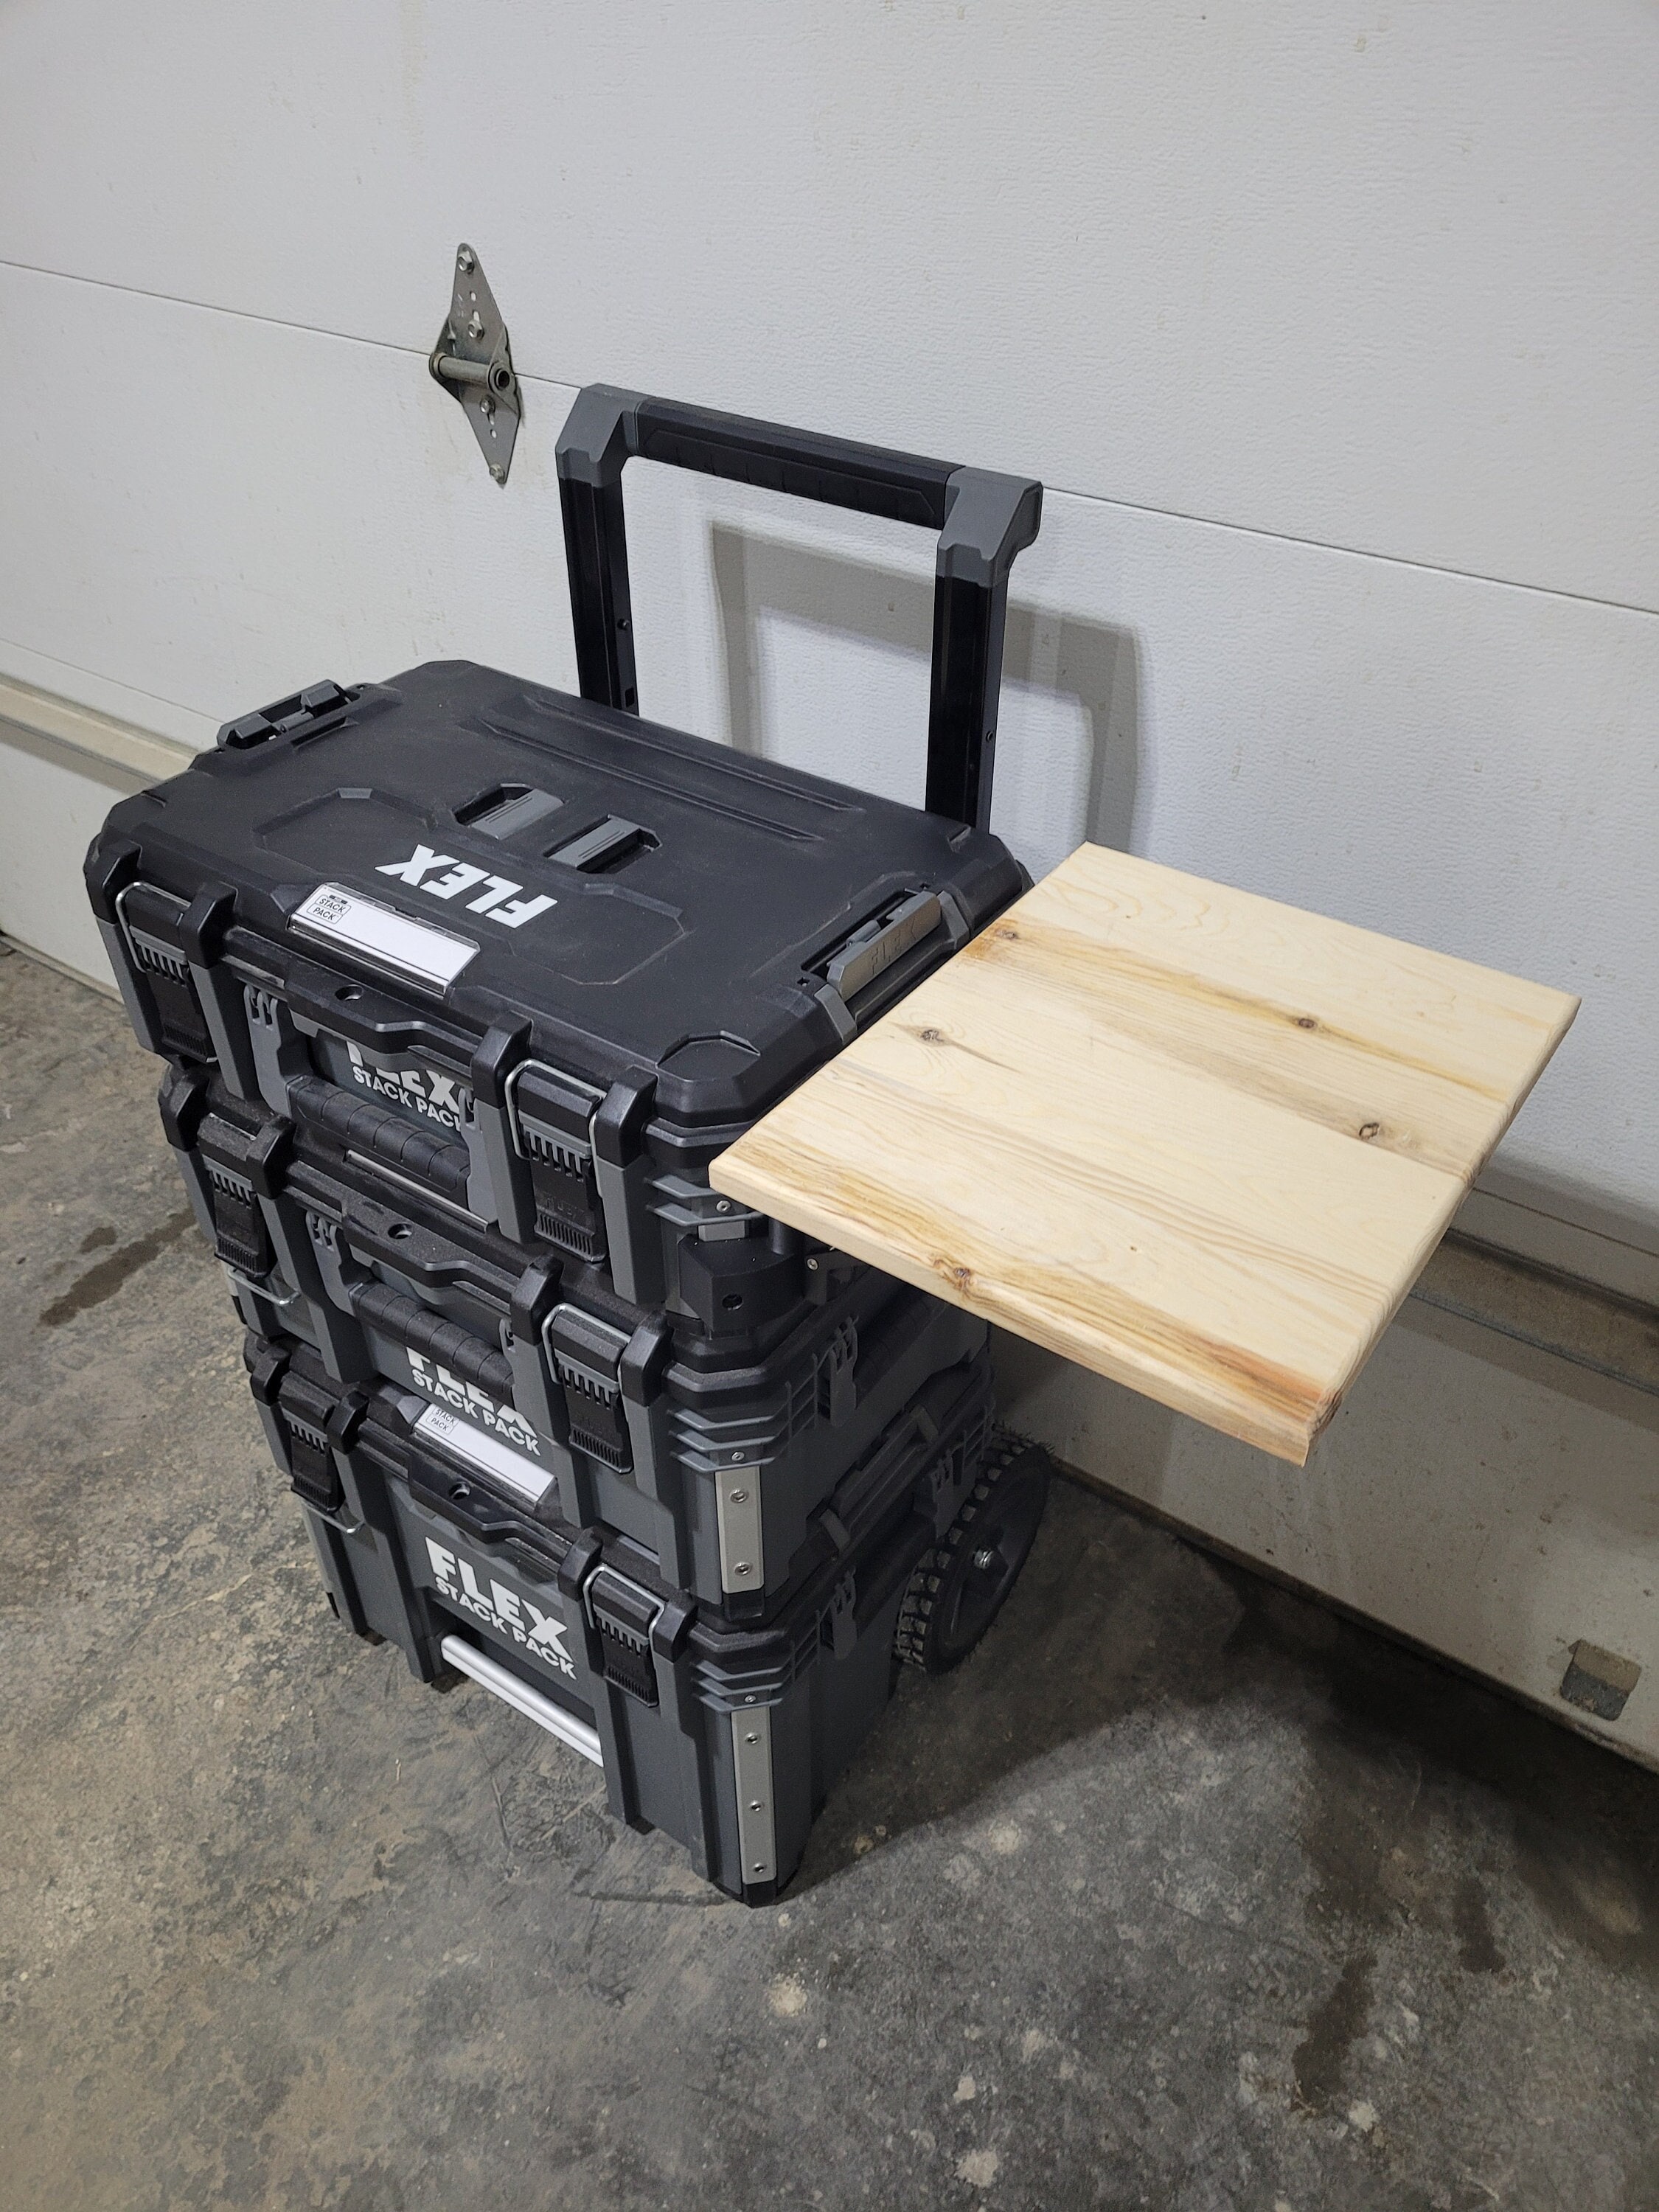 Flex Stack Pack Storage System  Full Review and Walkthrough 